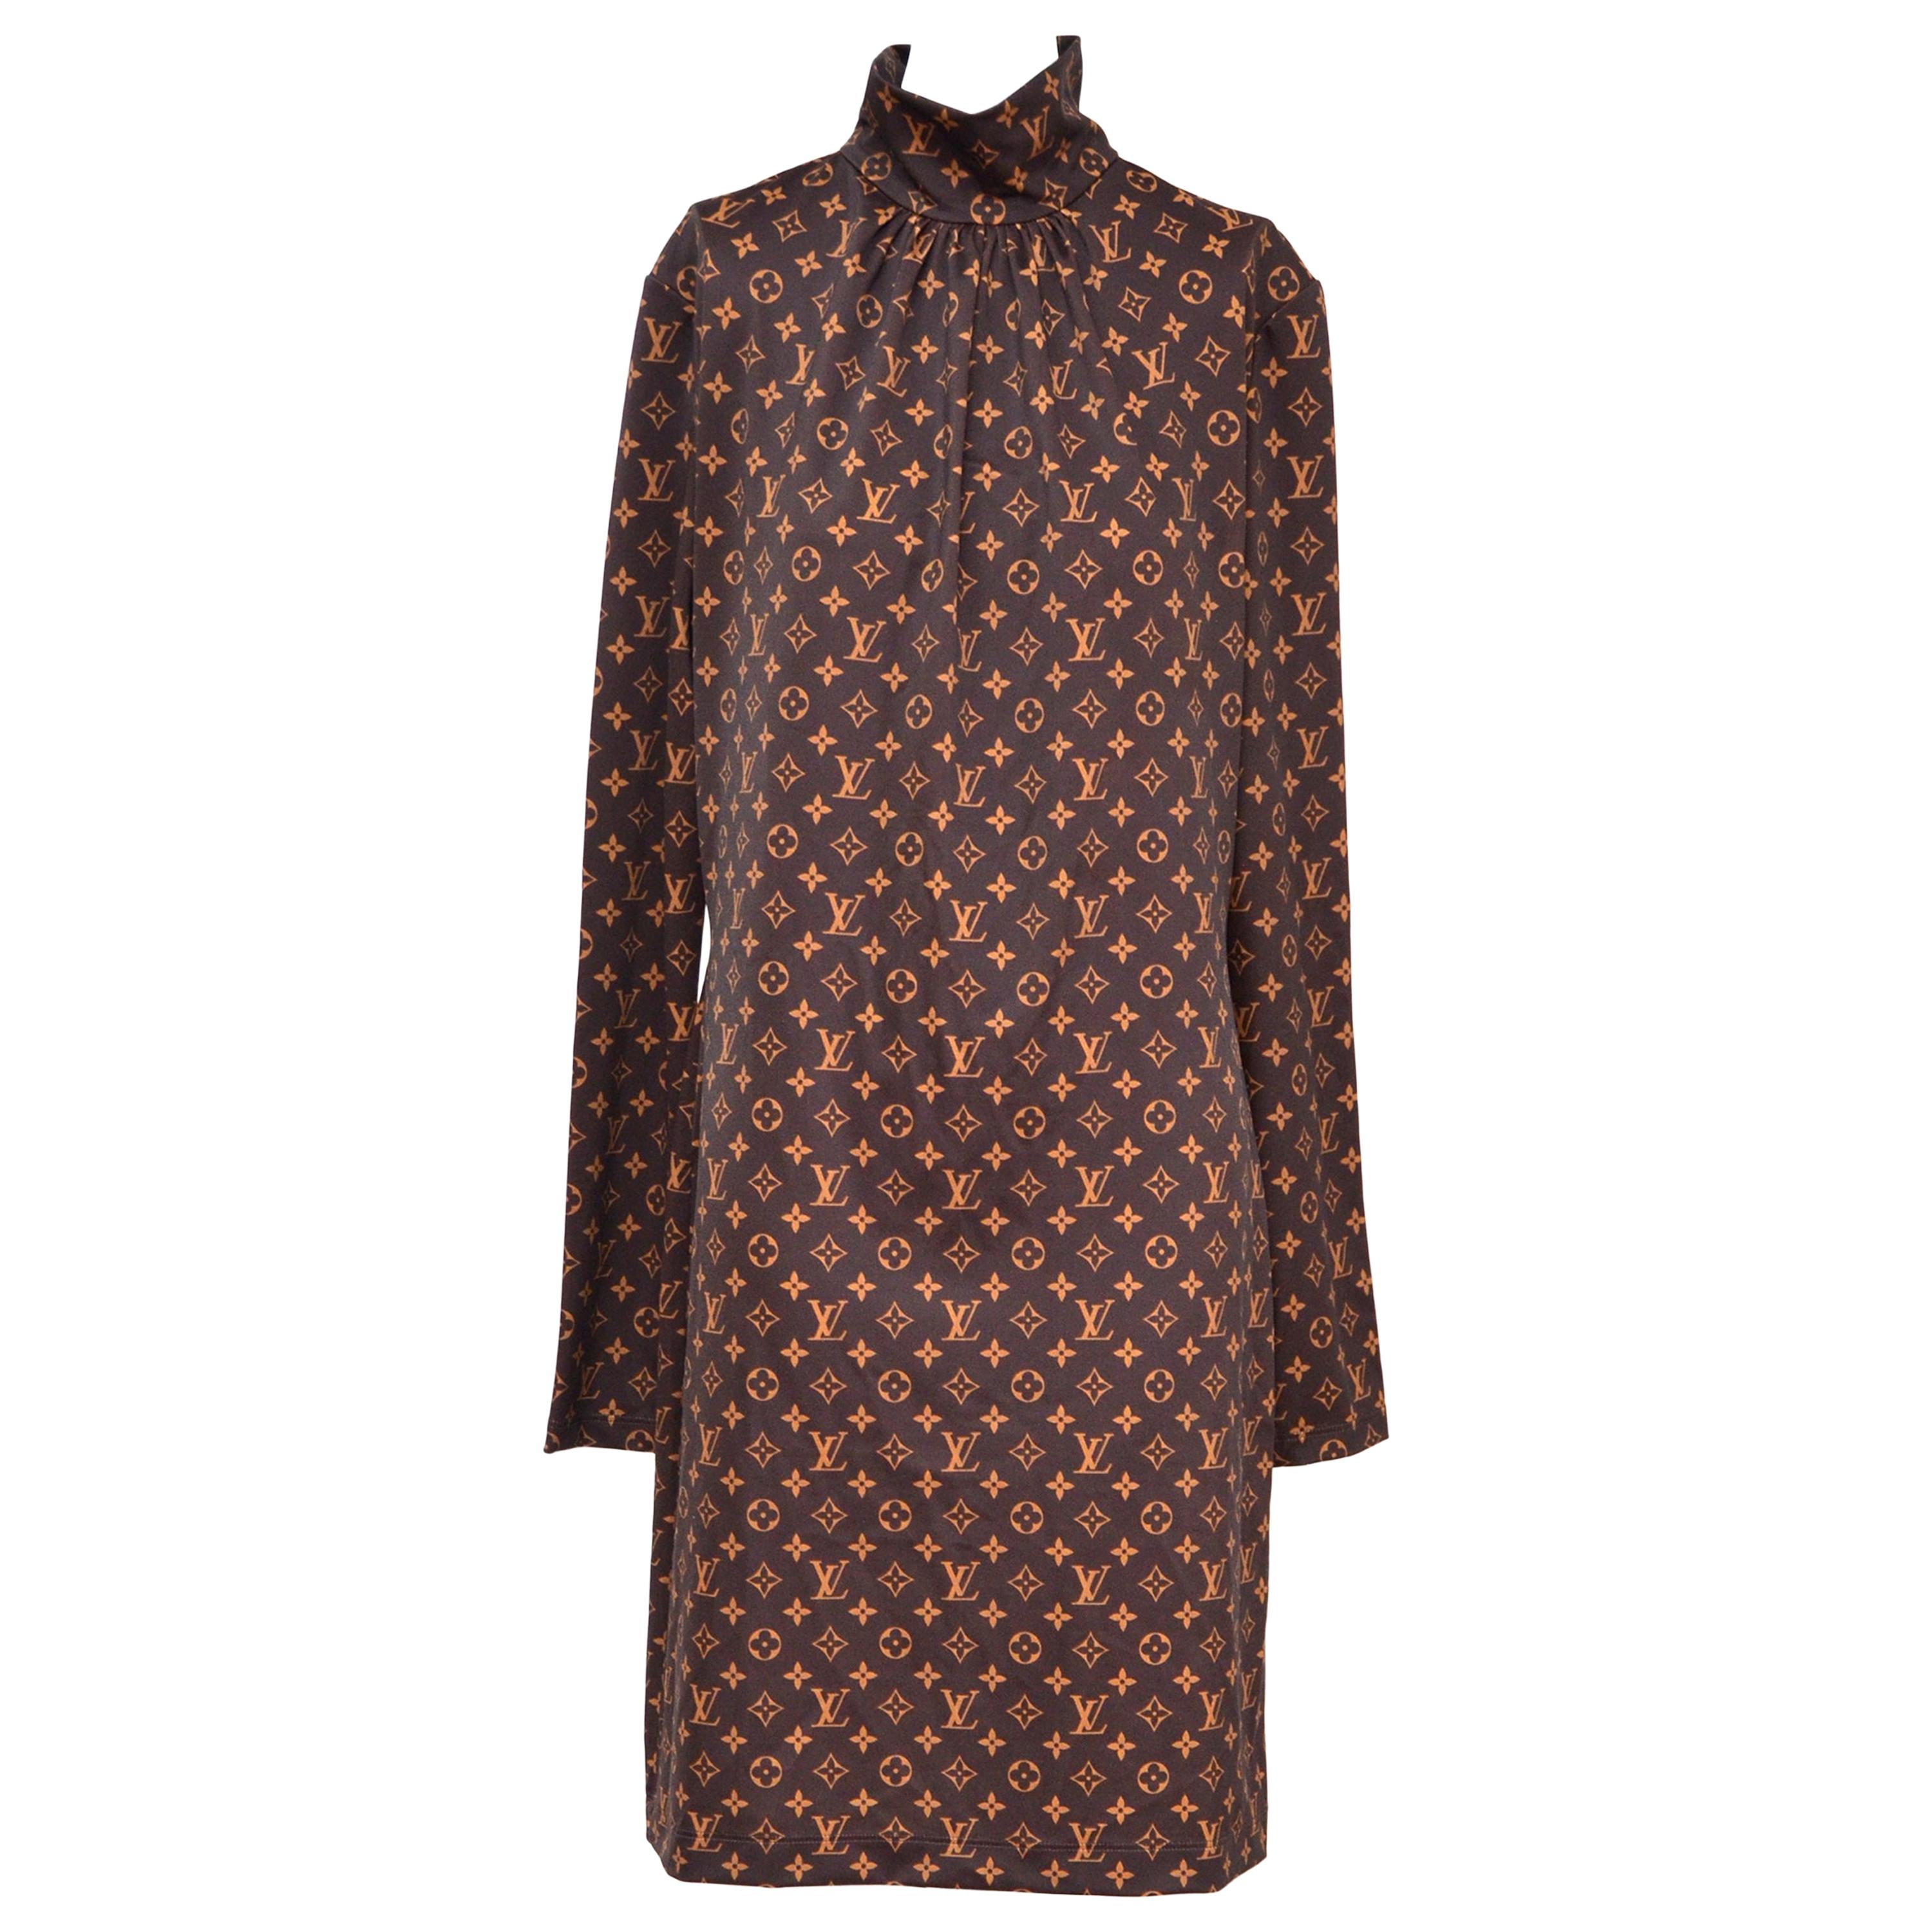 Louis Vuitton Monogram Print Long-Sleeved Dress L NEW With Tags at